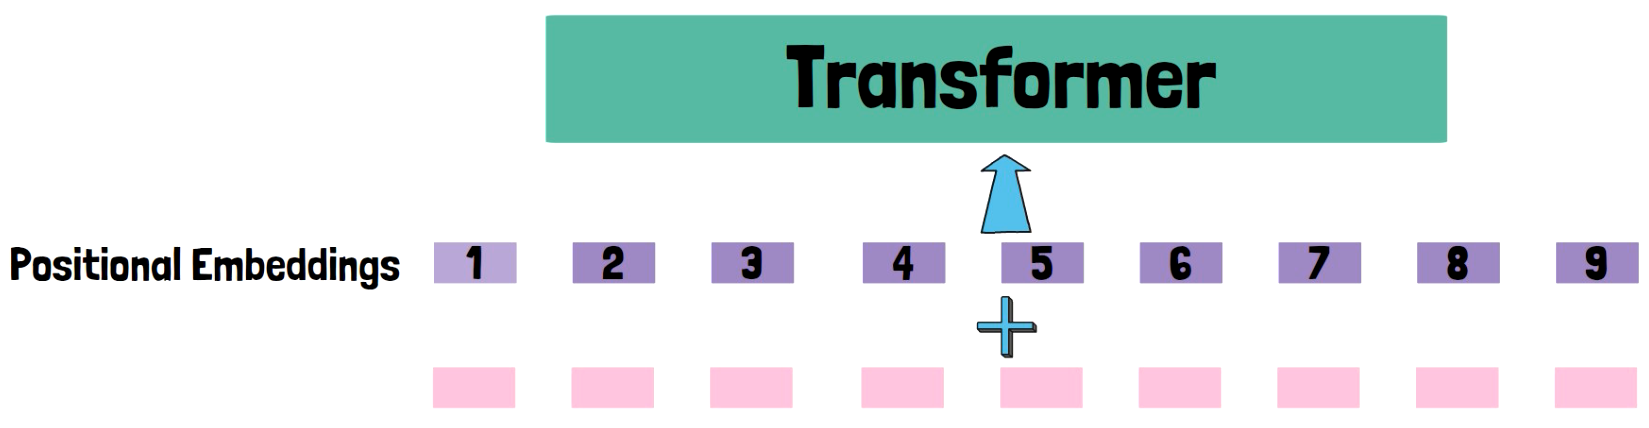 Positional embeddings are added to the transformer input